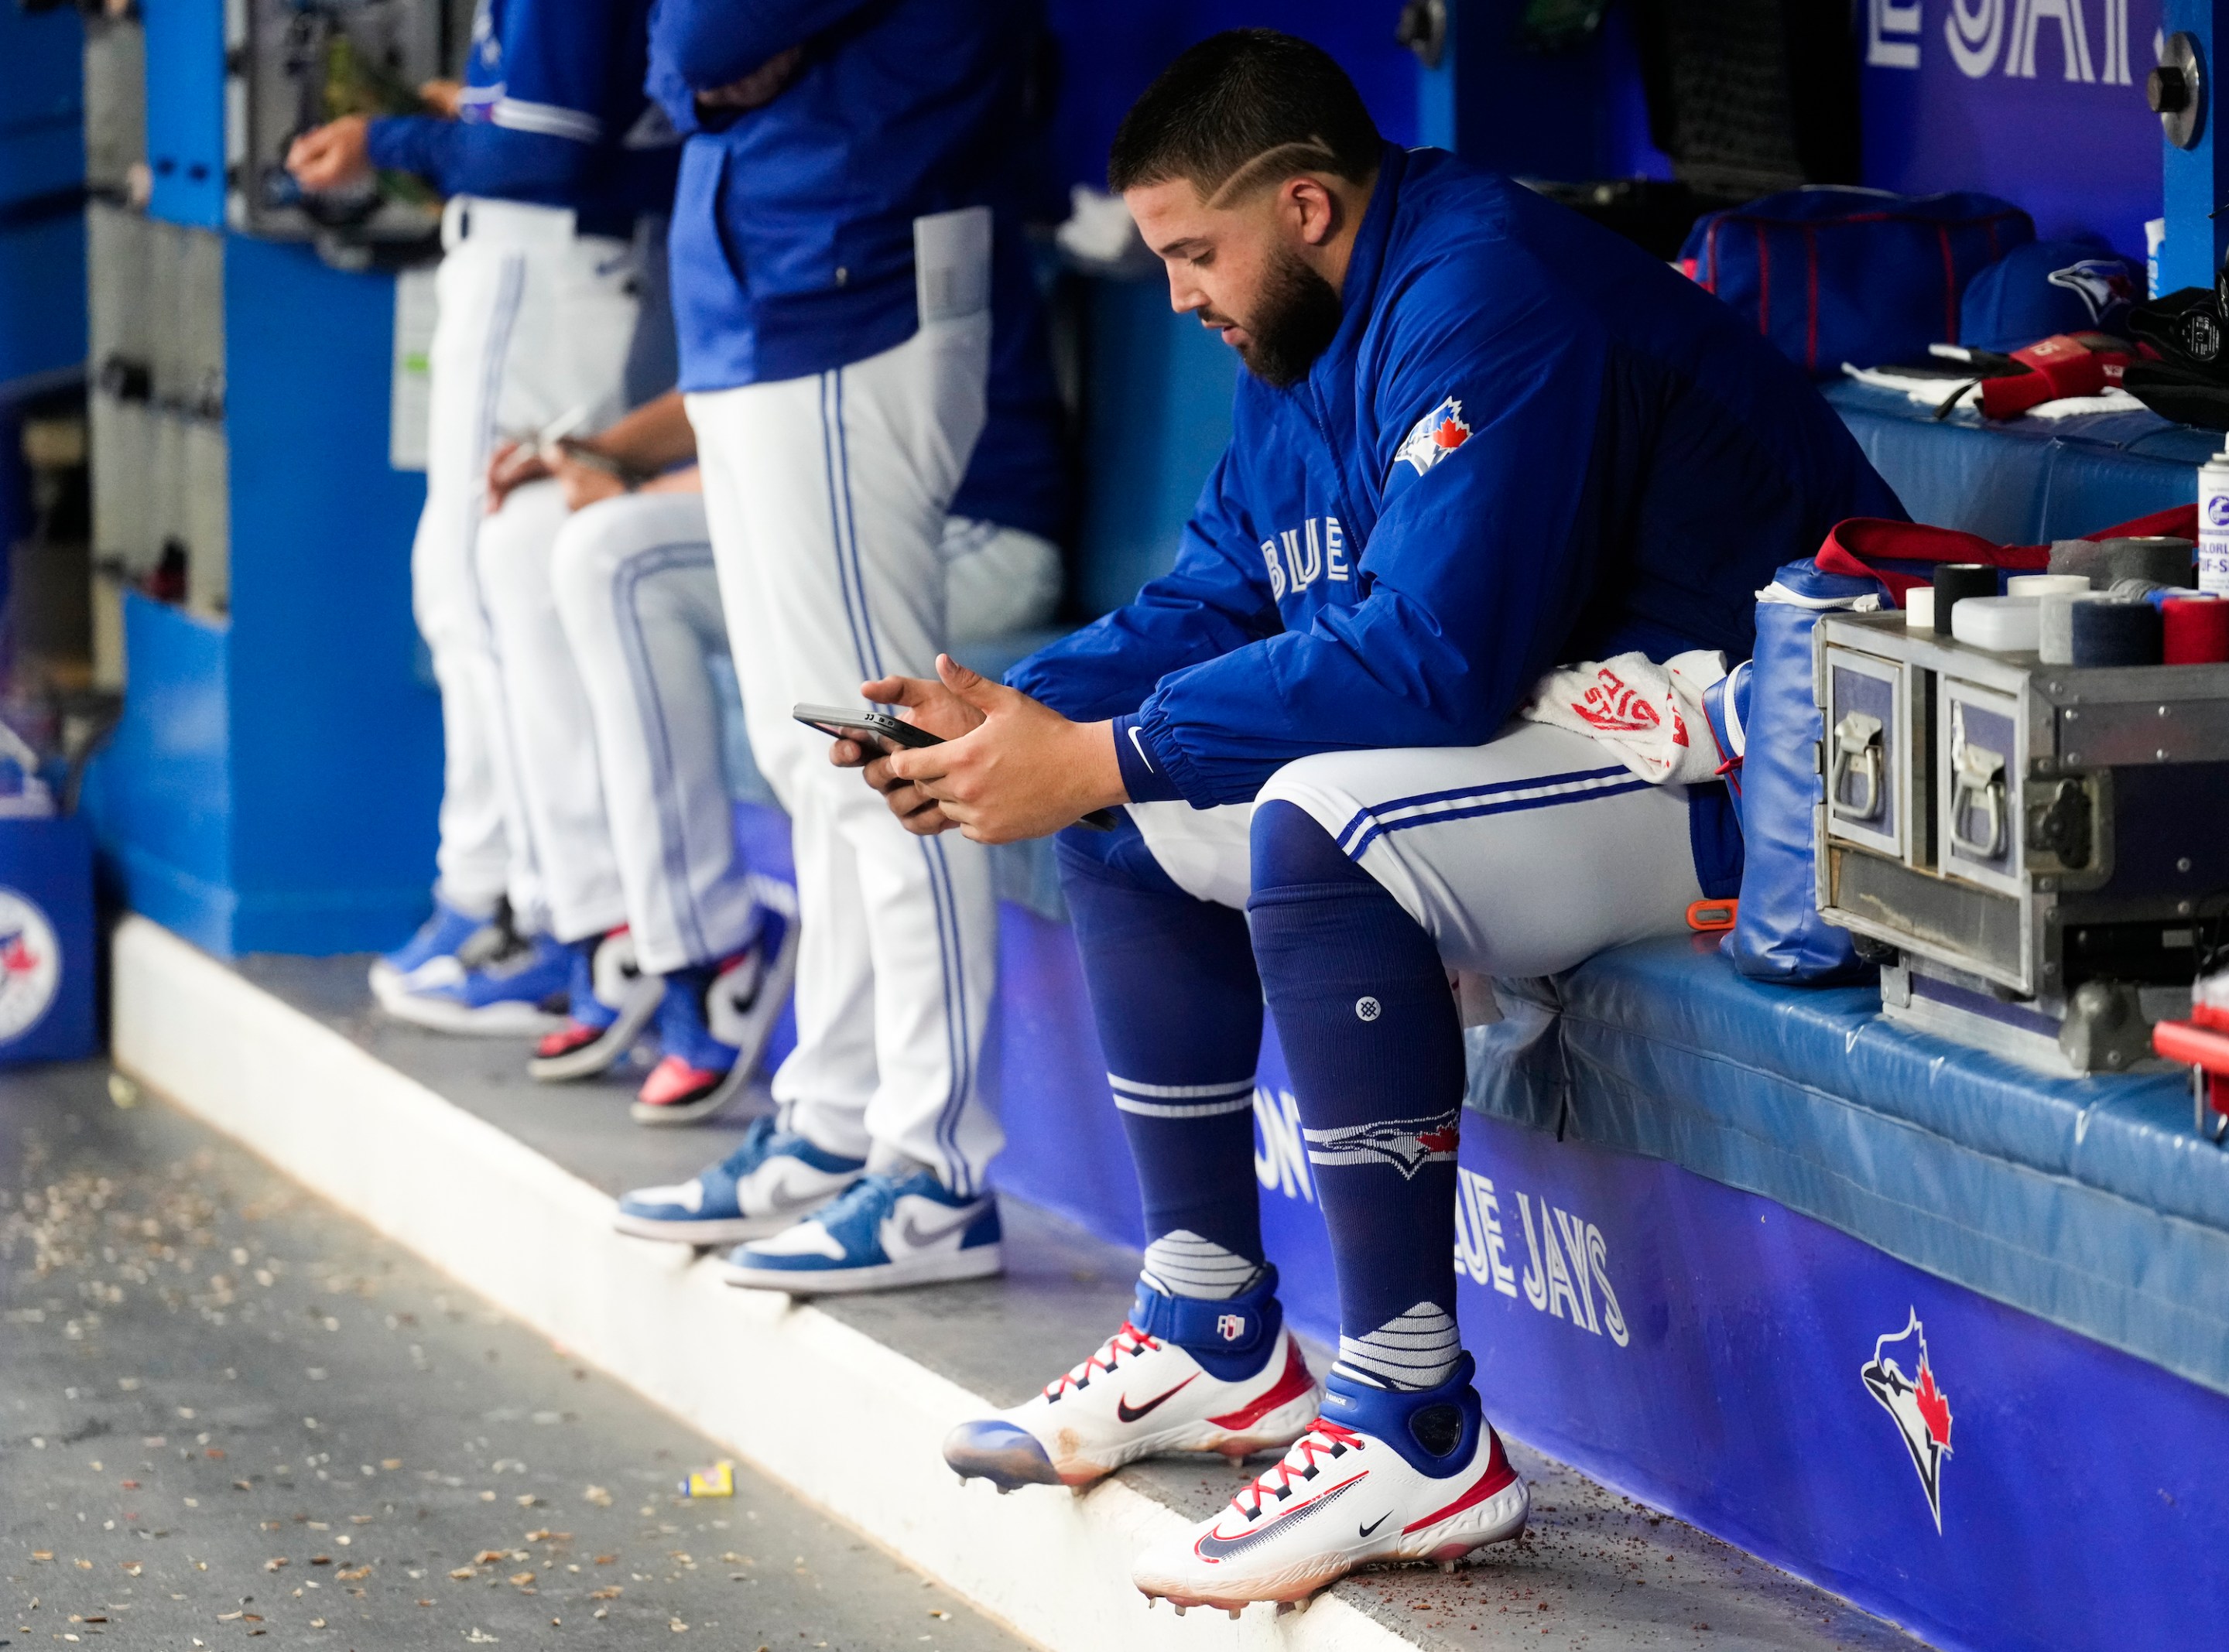 Alek Manoah #6 of the Toronto Blue Jays watches recording on the iPad in the dugout after getting pulled from the game in the first inning against the Houston Astros in their MLB game at the Rogers Centre on June 5, 2023 in Toronto, Ontario, Canada.